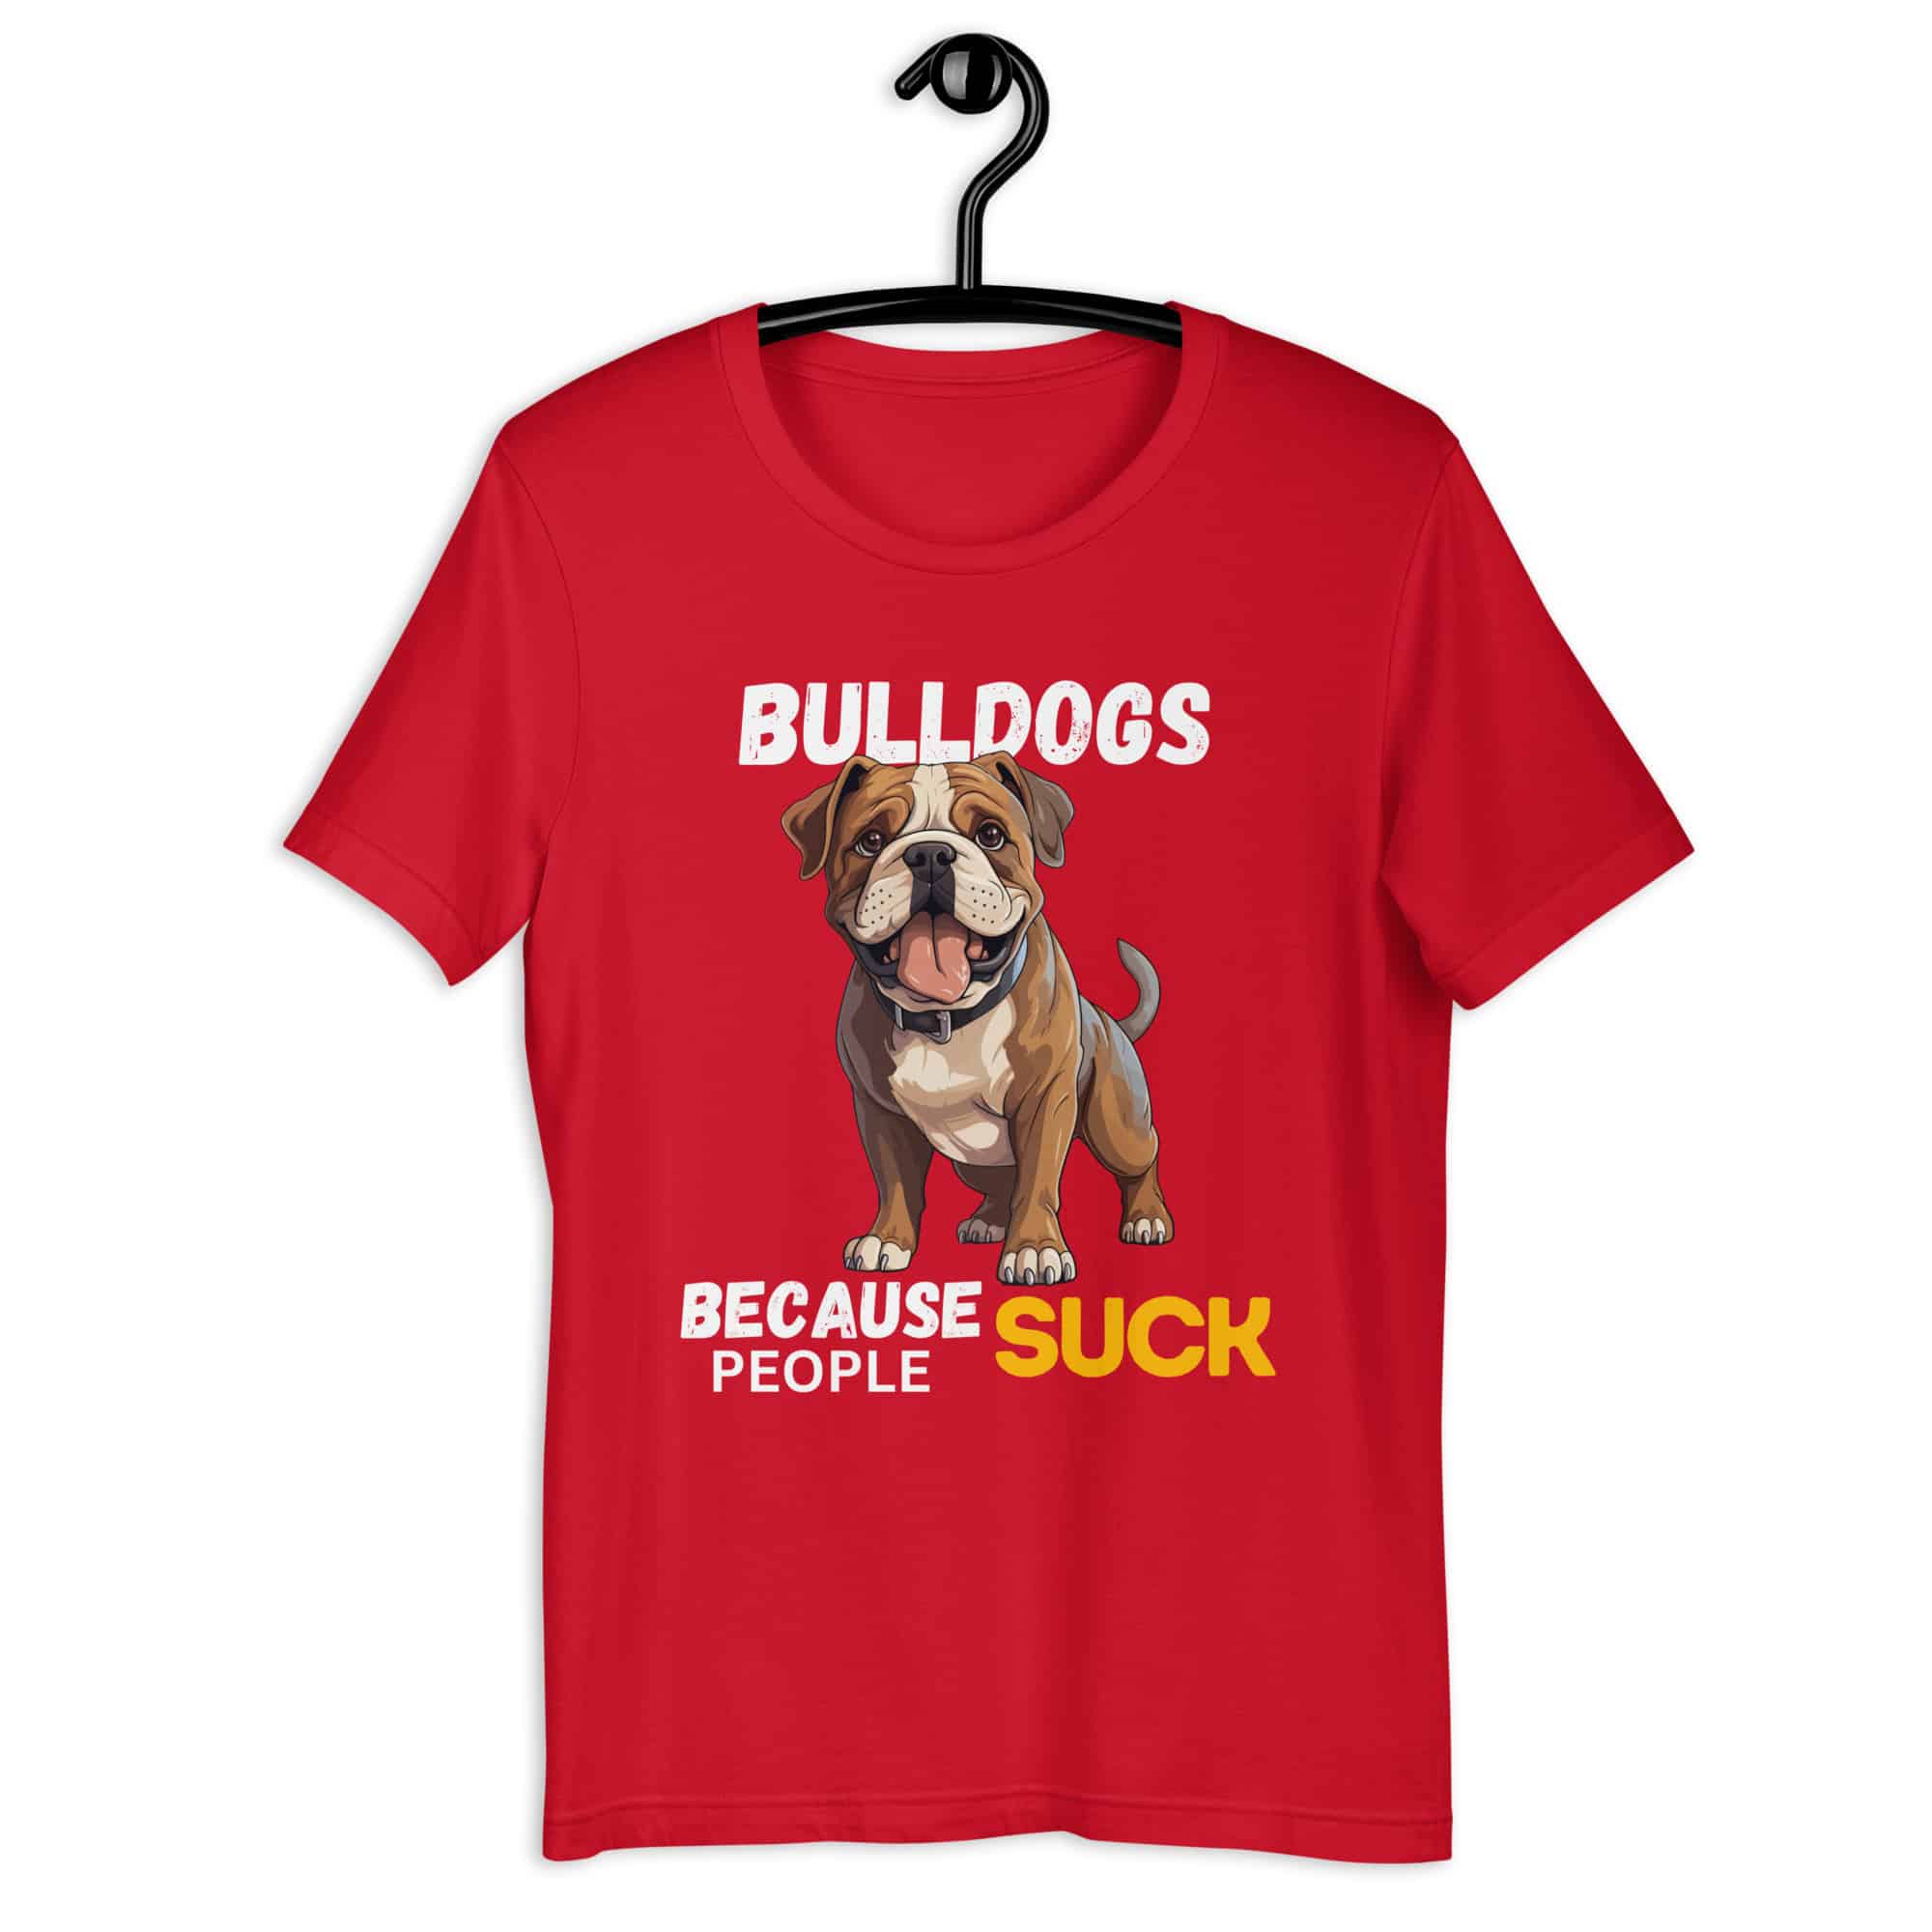 Bulldogs Because People Suck Unisex T-Shirt red